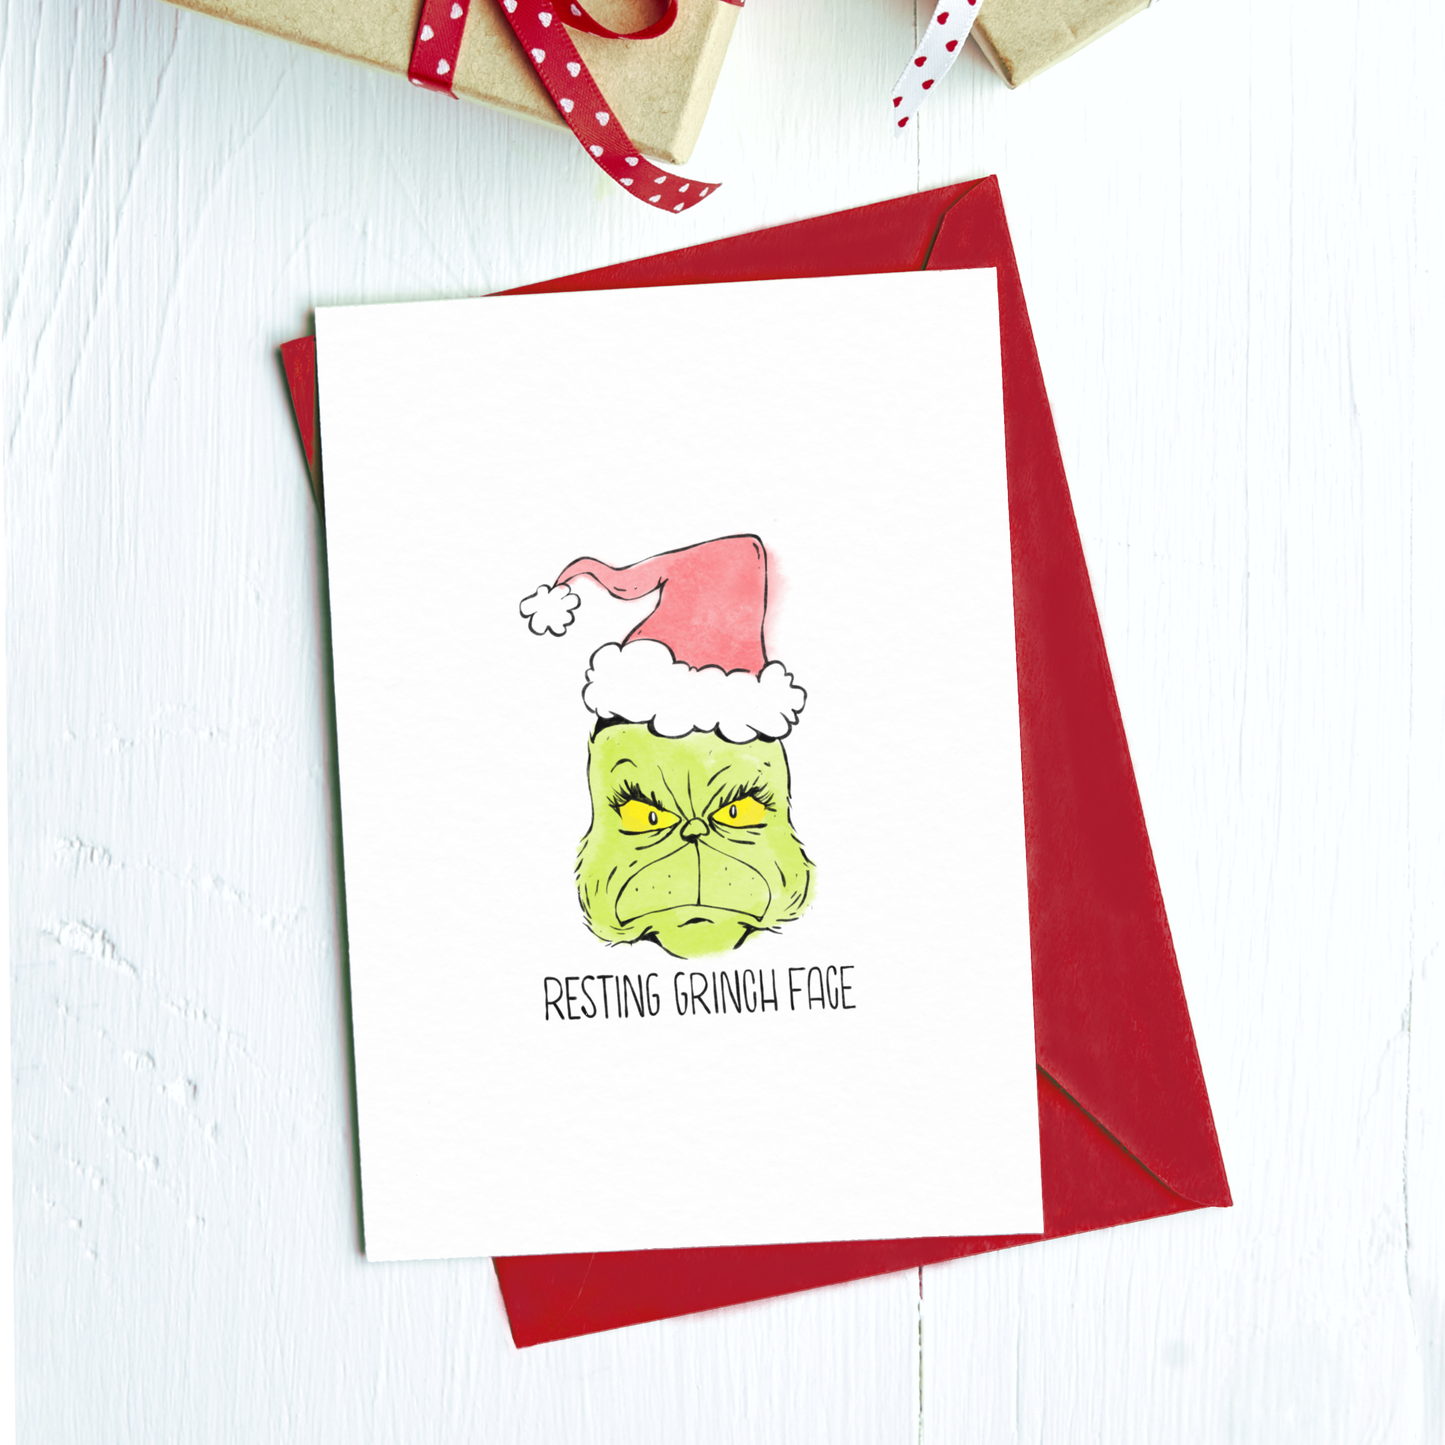 Greeting Card-Christmas-01: Resting Grinch Face